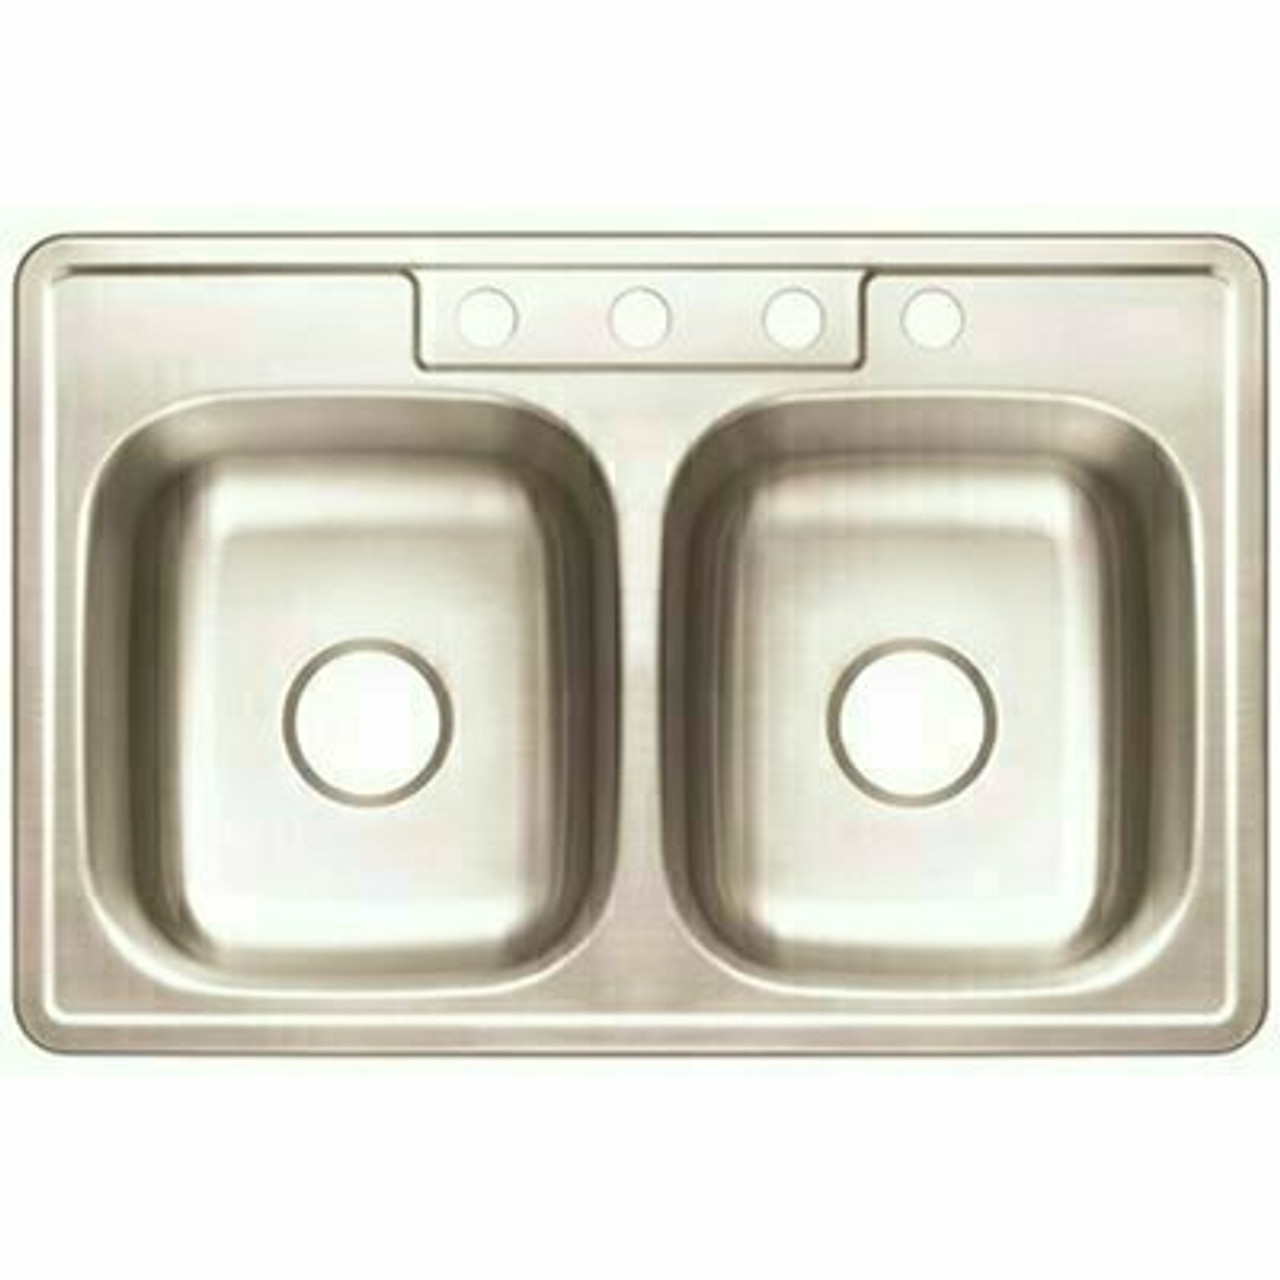 Premier Stainless Steel Kitchen Sink 33 In. 4-Hole Double Bowl Drop-In Kitchen Sink With Brush Finish